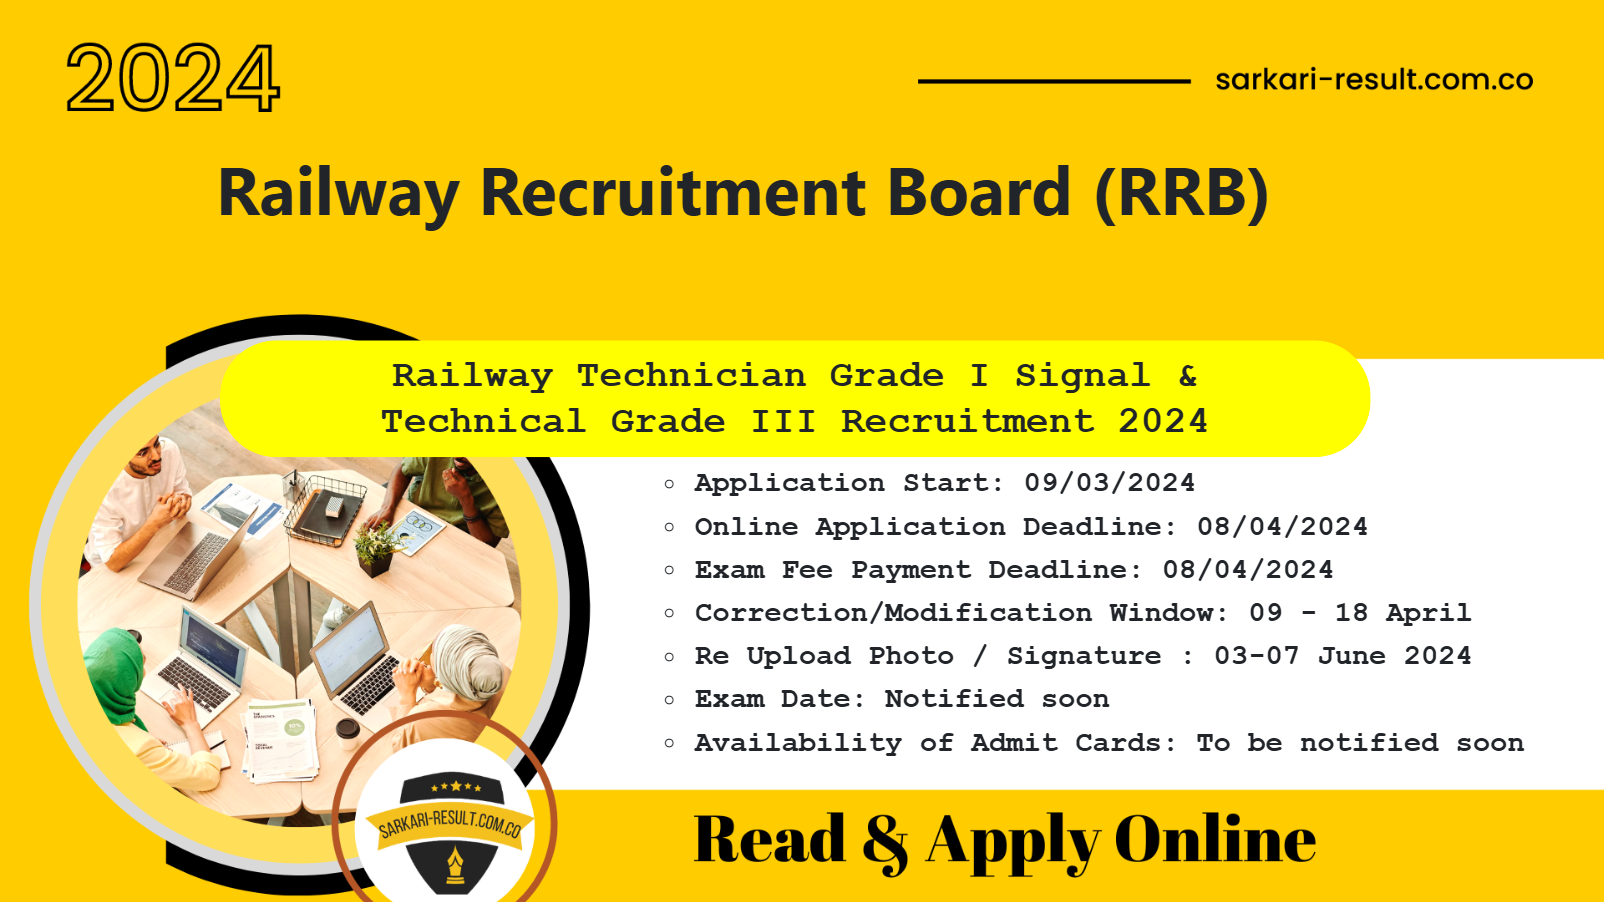 Apply online for 9000 posts in the Railway Recruitment Board (RRB) Technician recruitment through CEN 02/2024.